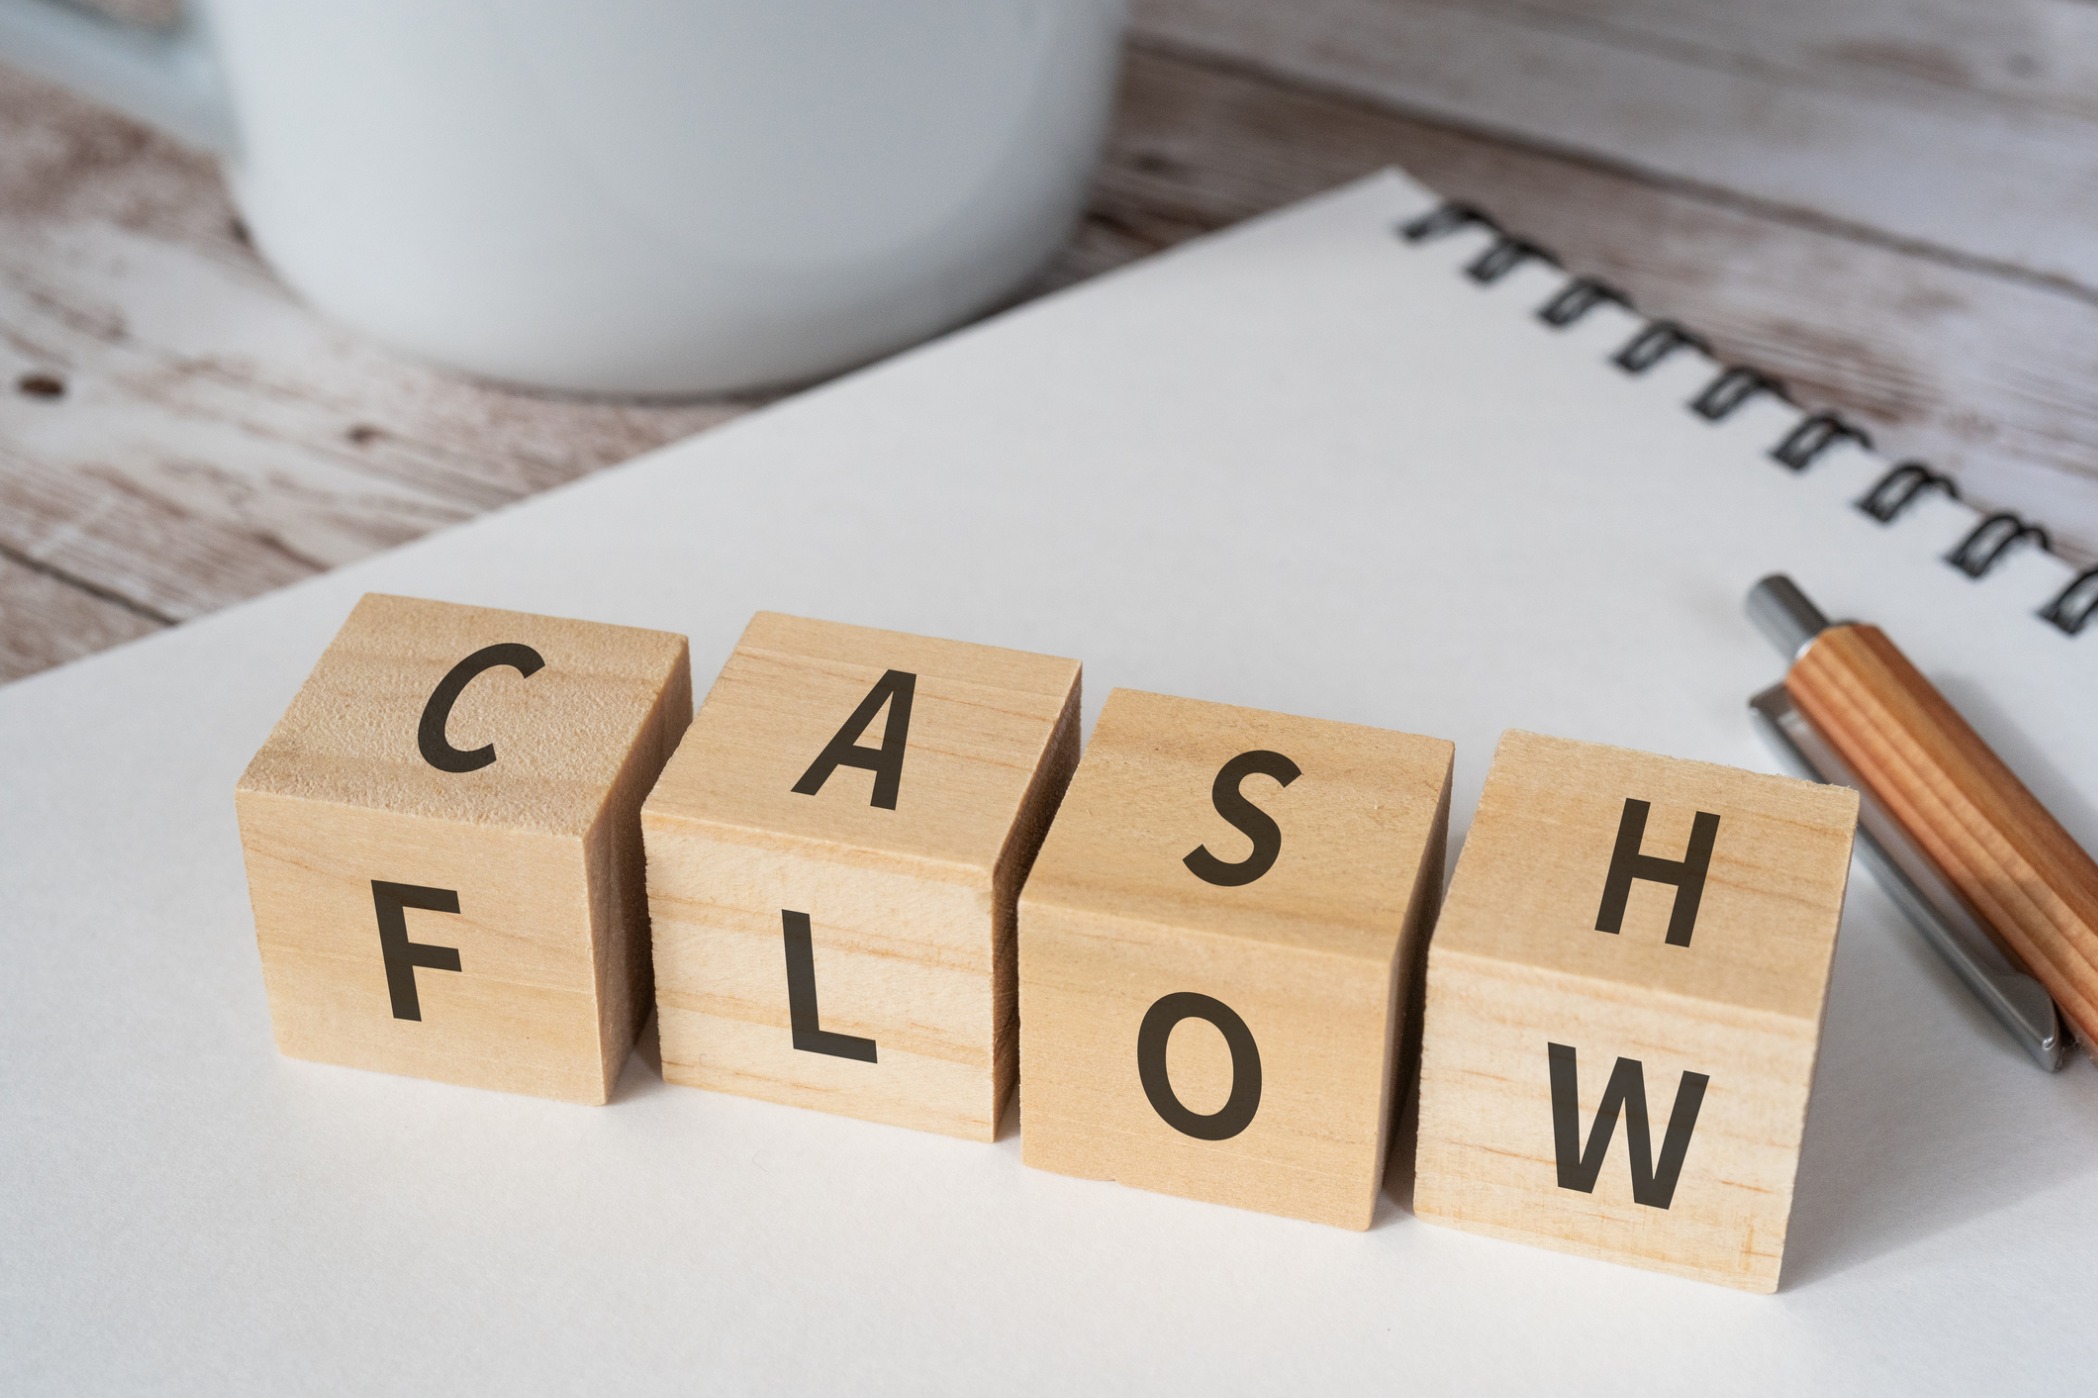 Accounting for Cash Flow Issues that Hinder Contingency Fee Law Firms